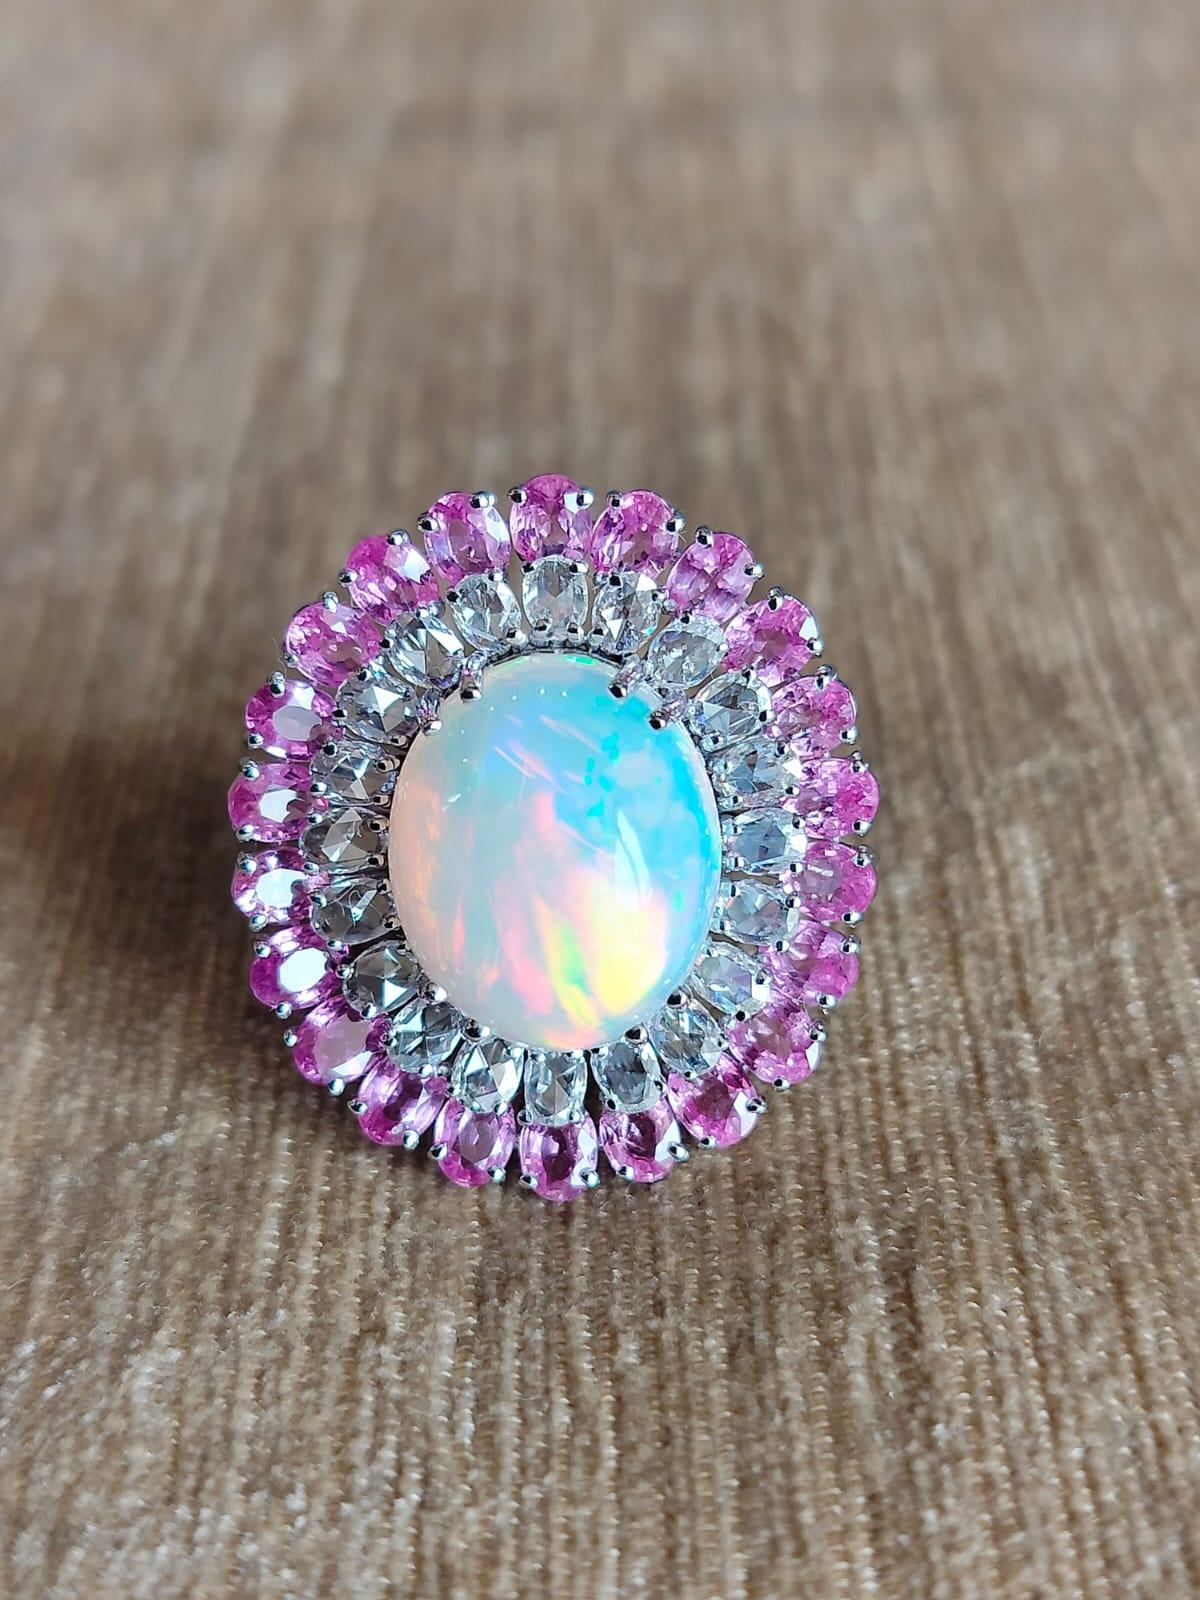 A classic Art Deco style Opal and Pink Sapphire Cocktail ring set in 18K White Gold & Diamonds. The weight of the Opal is 6.6 carats. The Opal is of Ethiopian origin. The weight of the Pink Sapphire is 4.80 carat. The pear shaped Pink Sapphires are